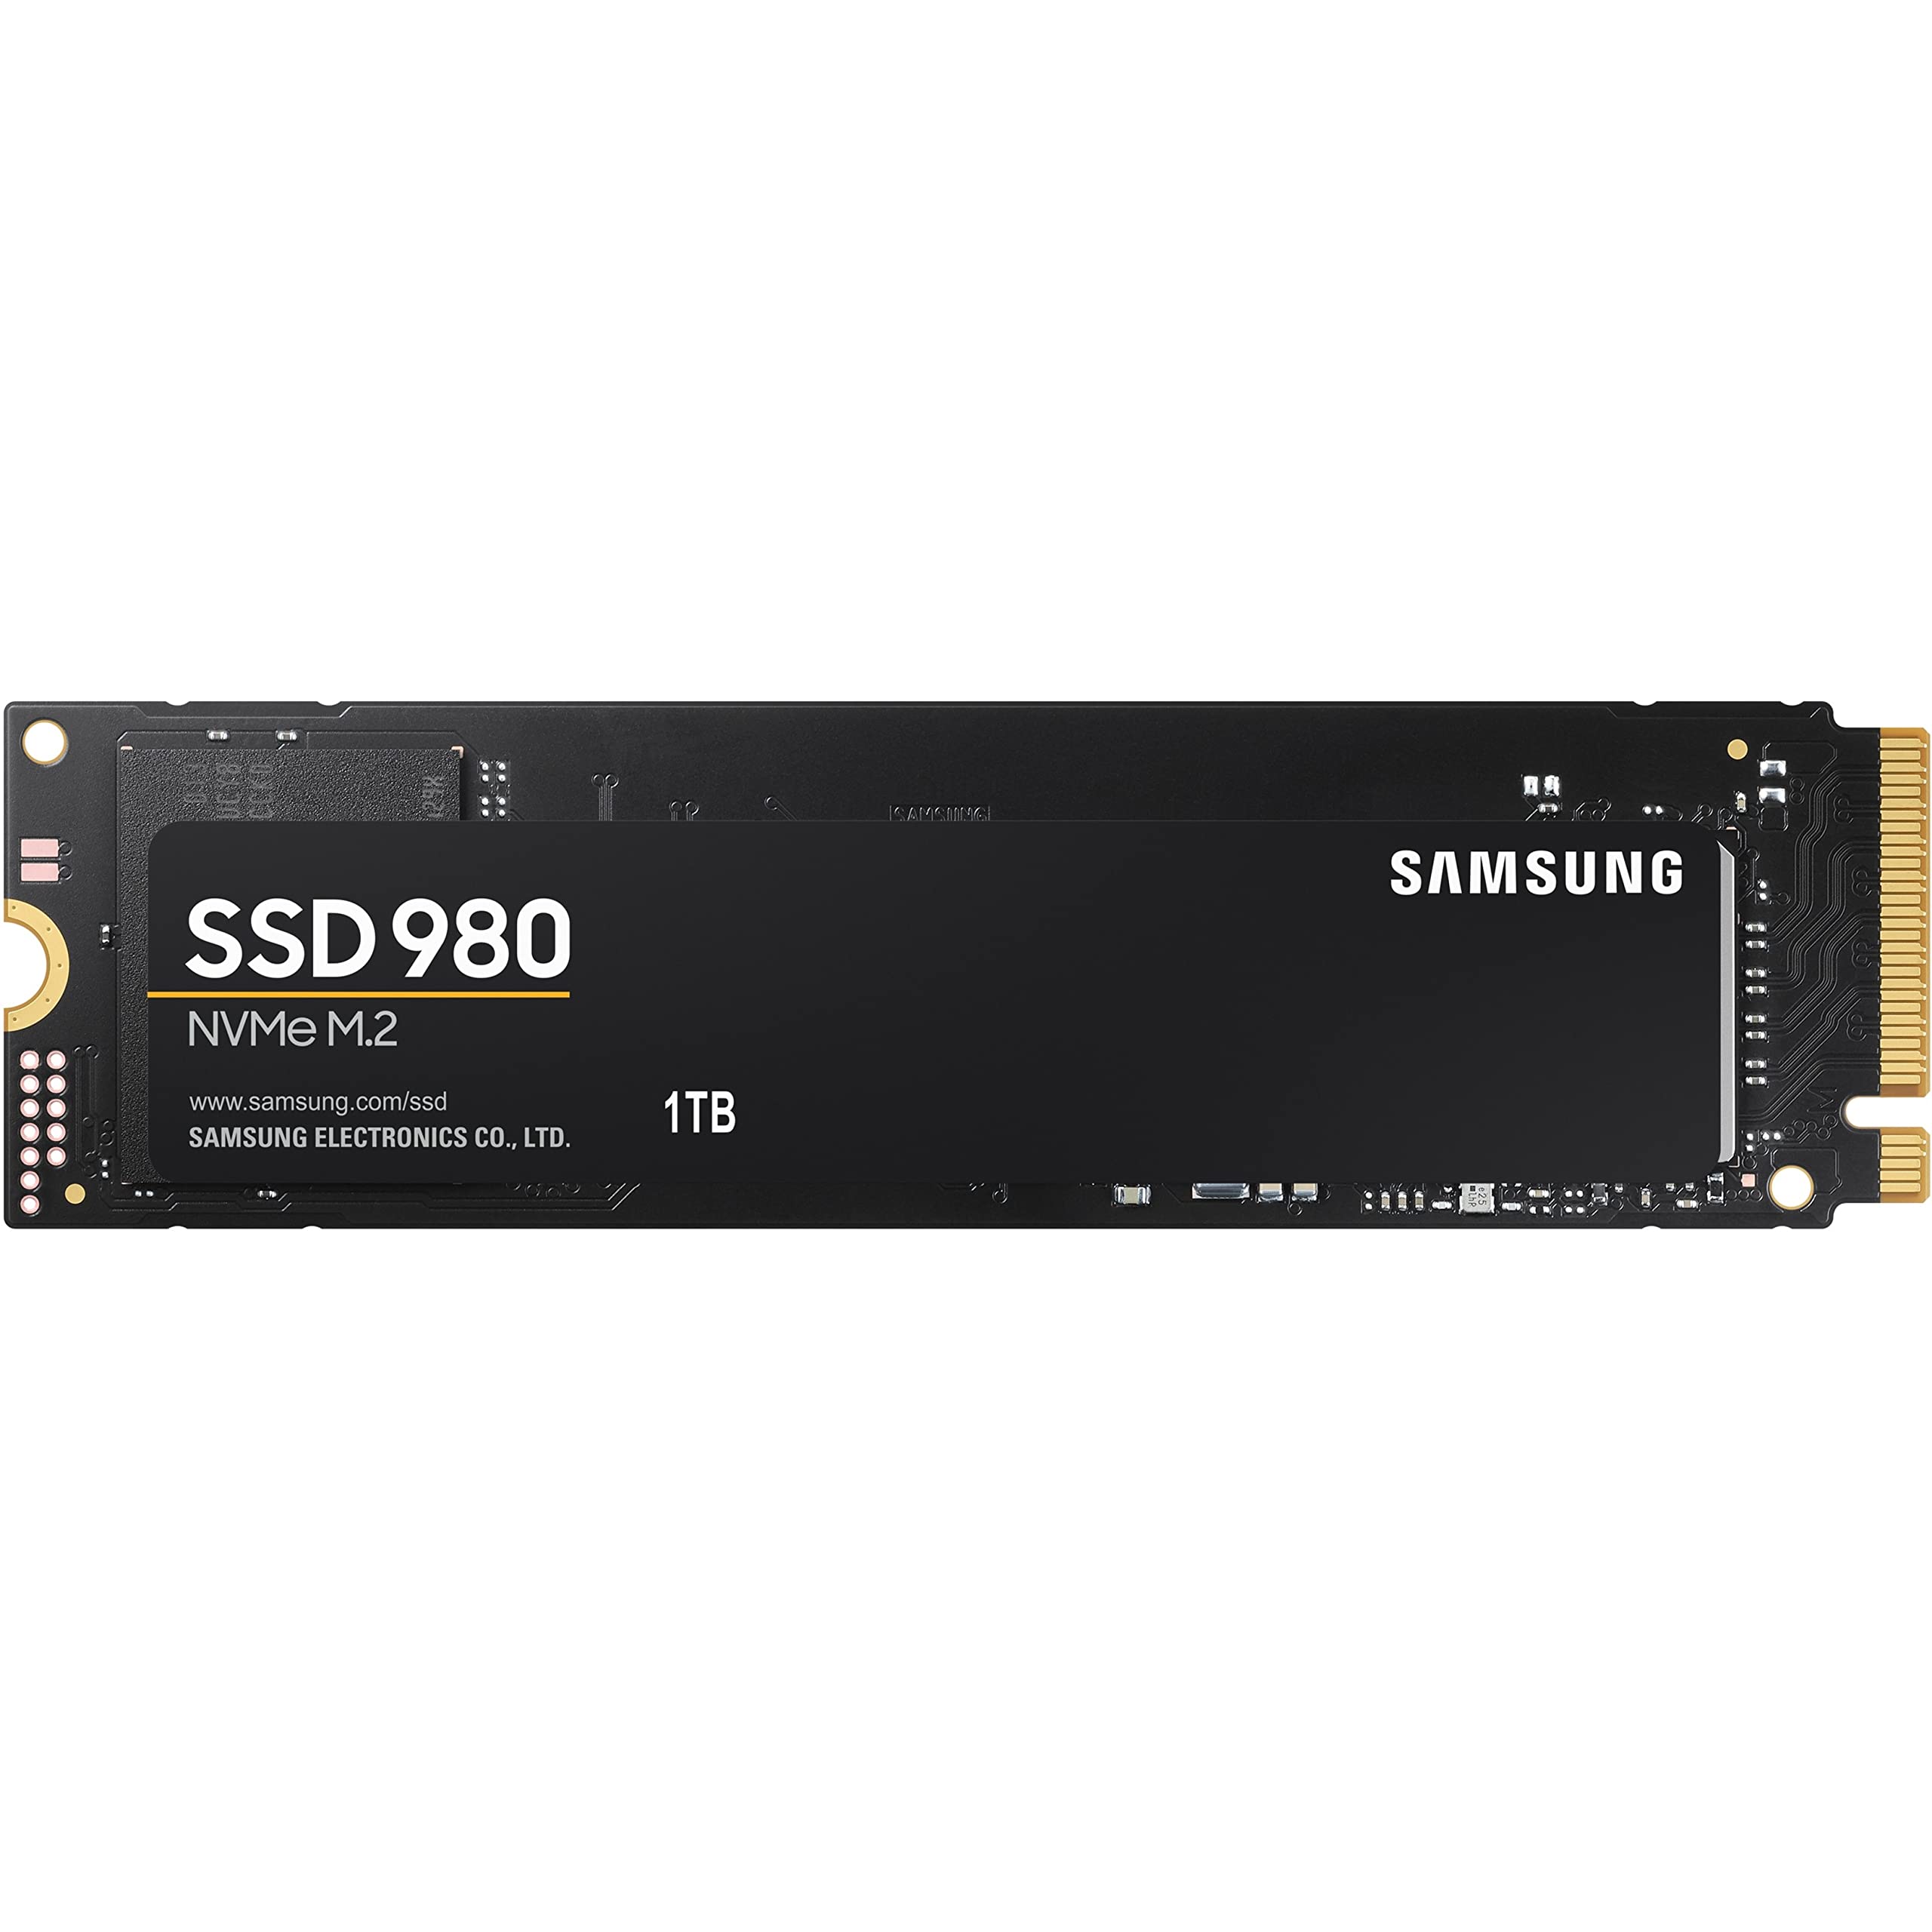 1TB Samsung 980 NVMe Internal Solid State Drive SSD - $39.99 + F/S - Amazon